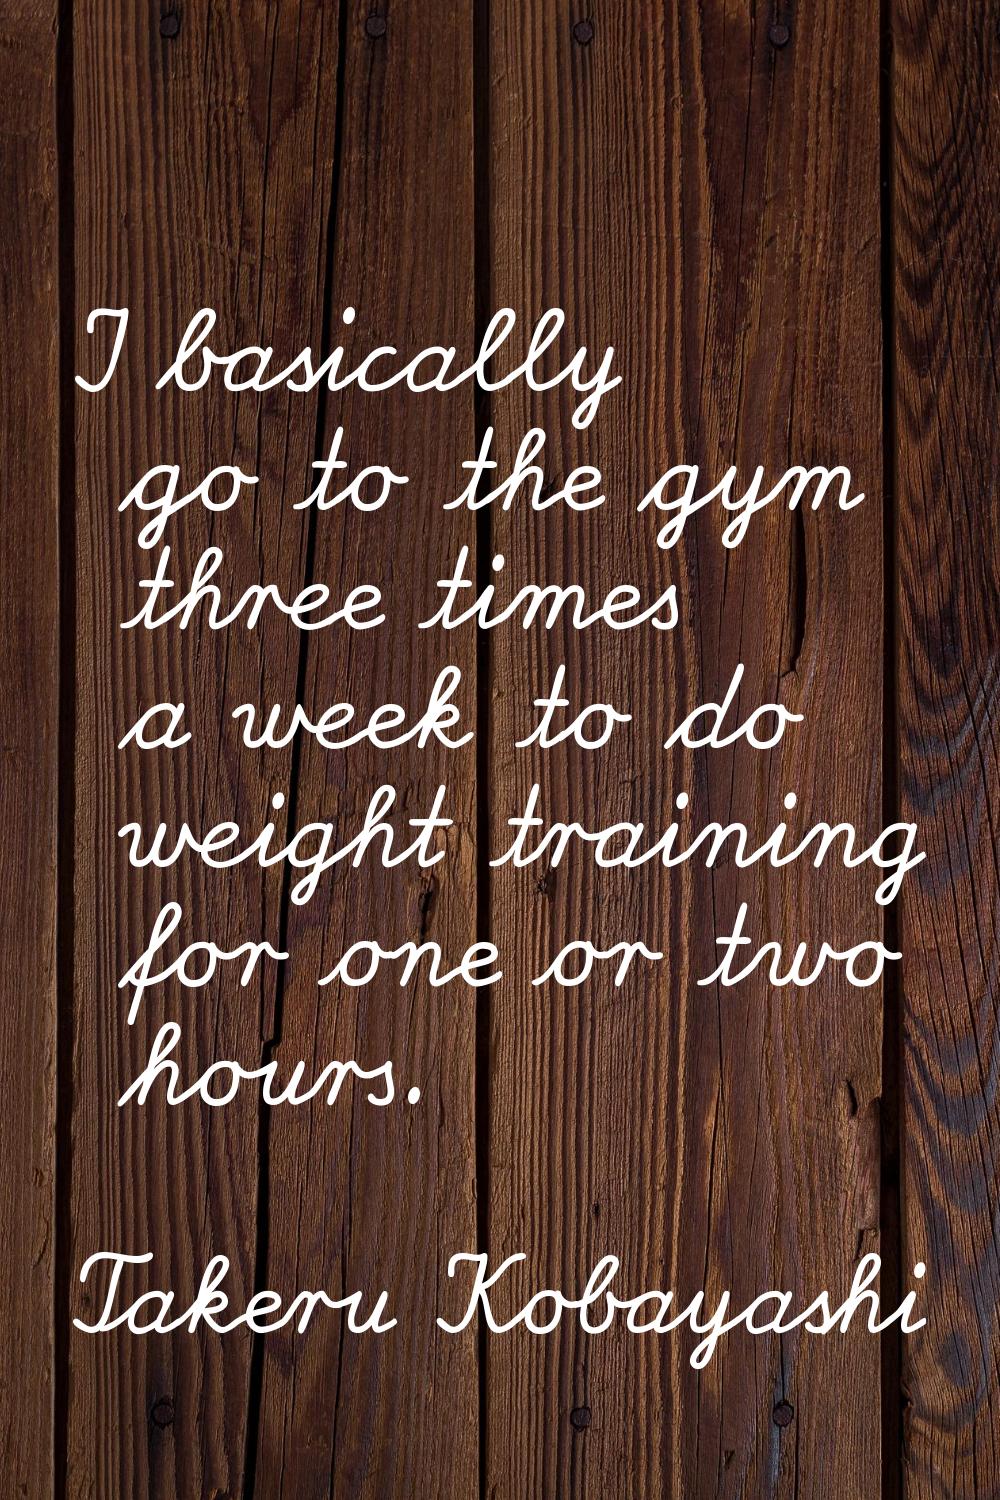 I basically go to the gym three times a week to do weight training for one or two hours.